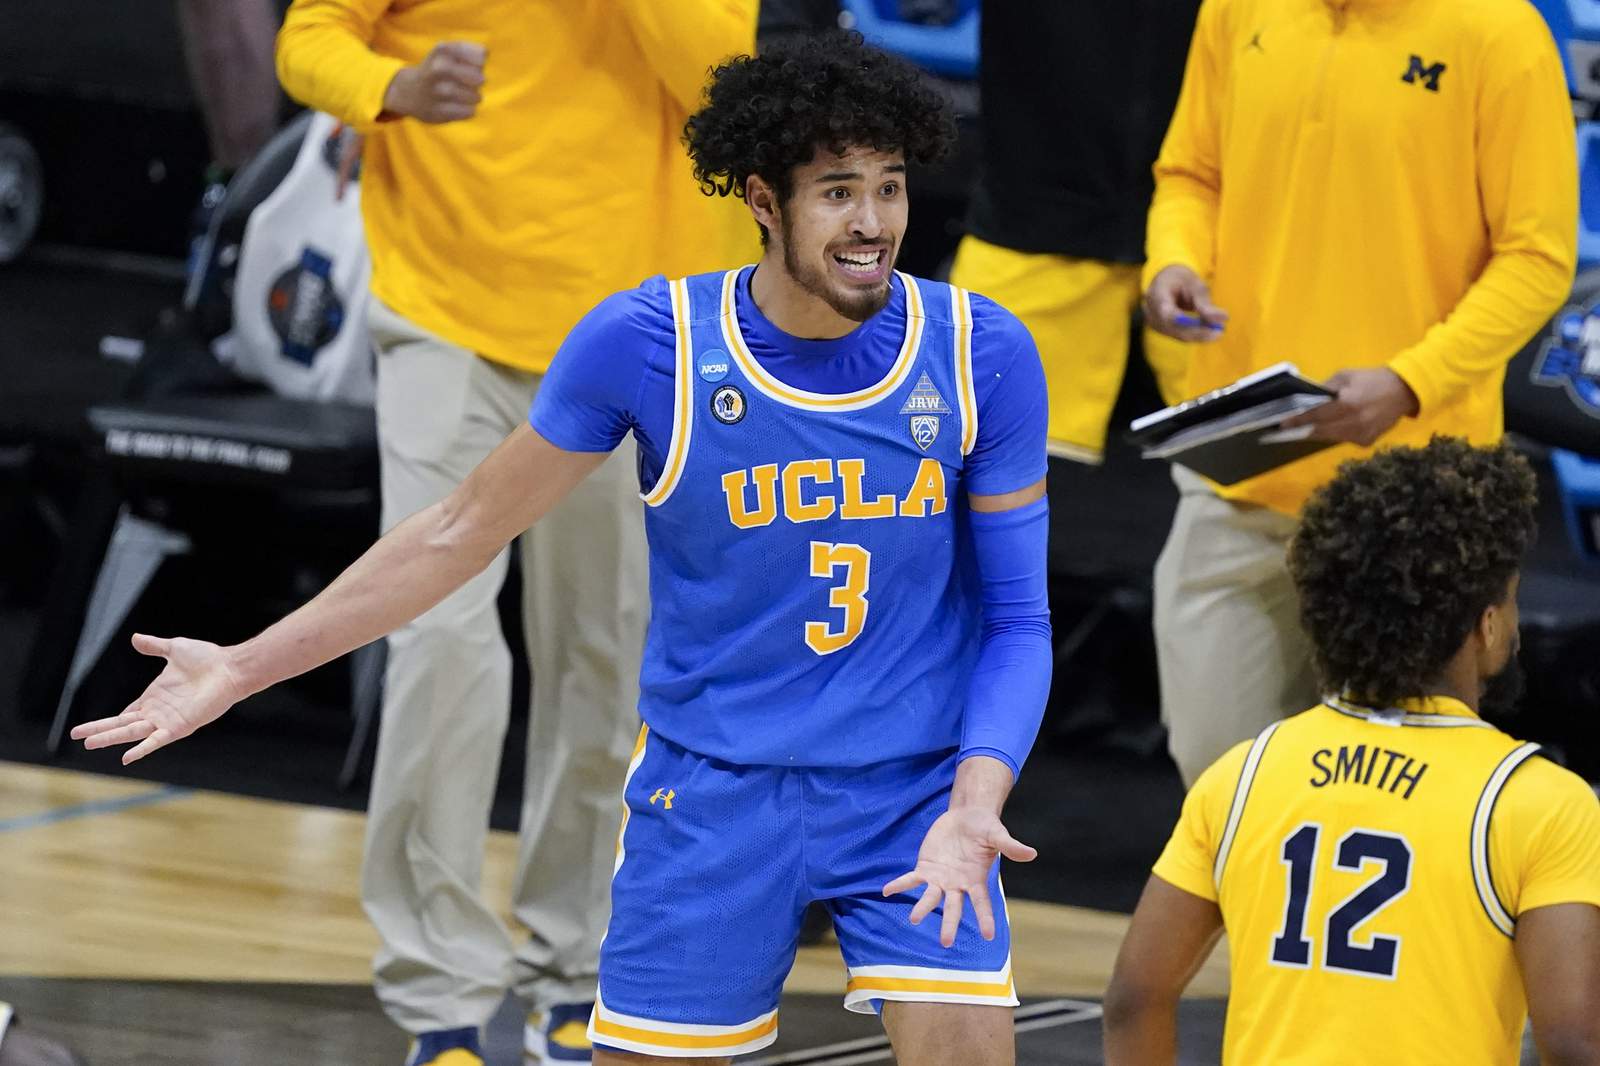 UCLA's Juzang could be first Asian American NBA lottery pick